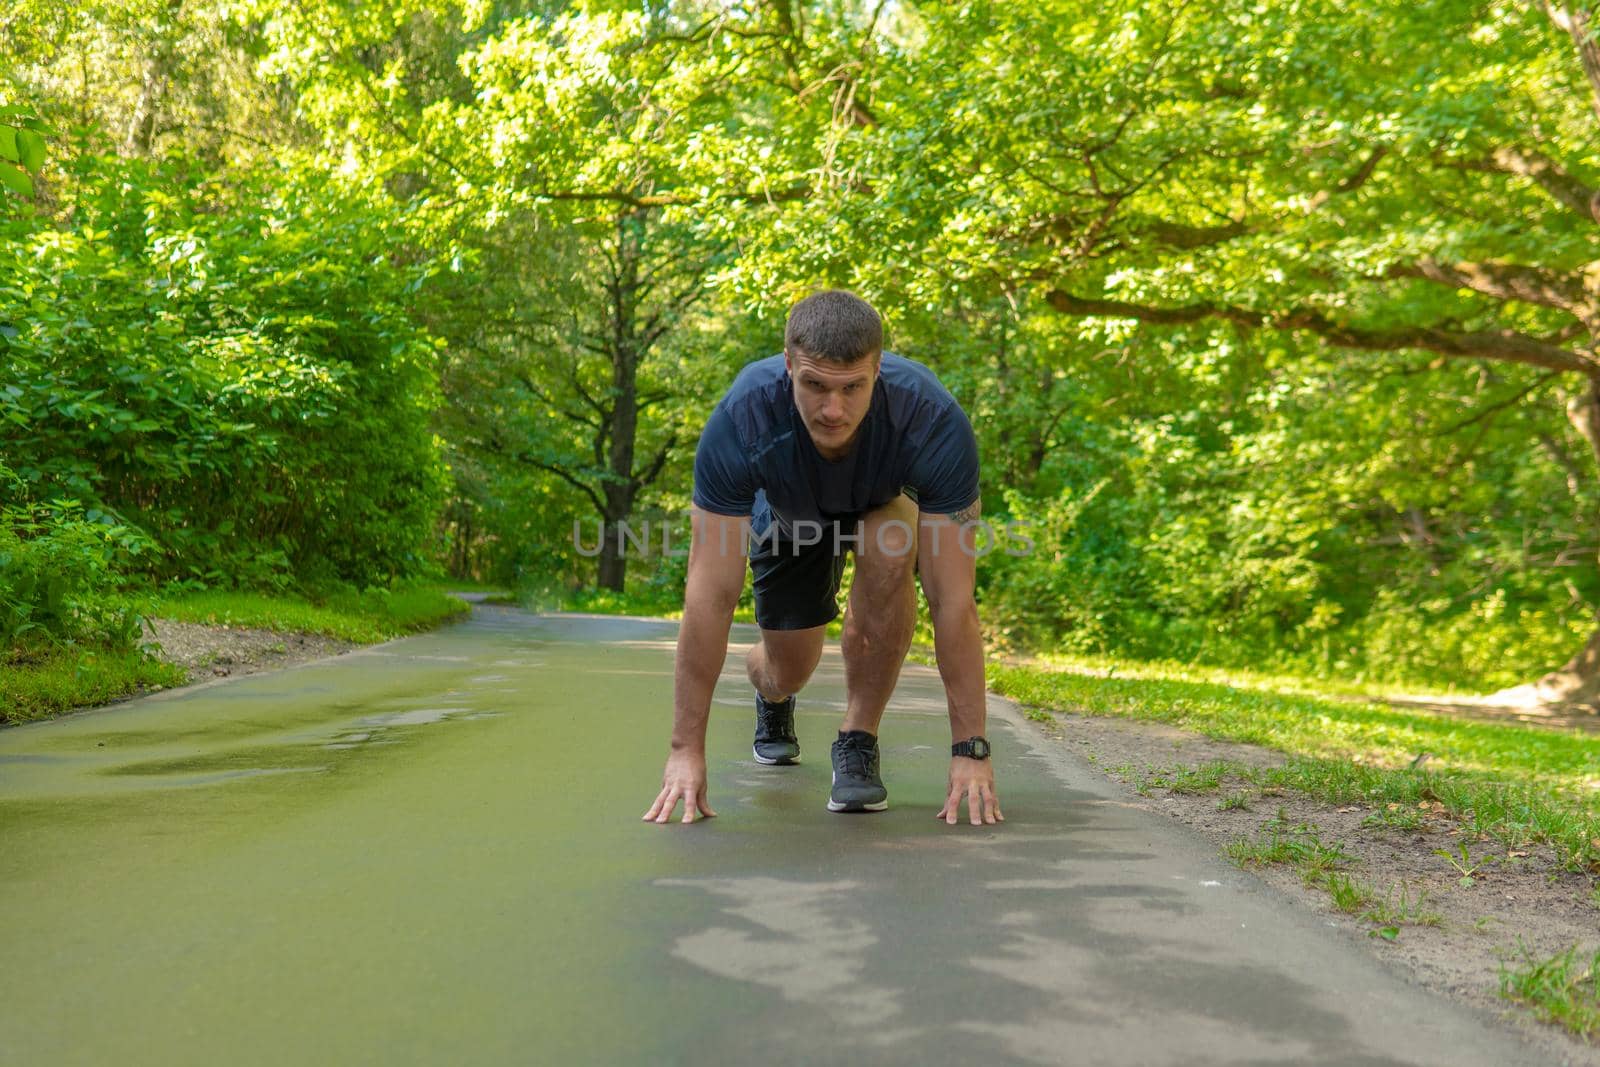 A man athlete runs in the park outdoors, around the forest, oak trees green grass young enduring athletic athlete runner nature, lifestyle outdoor young legs male, man. Adult energy running, stretching stretches